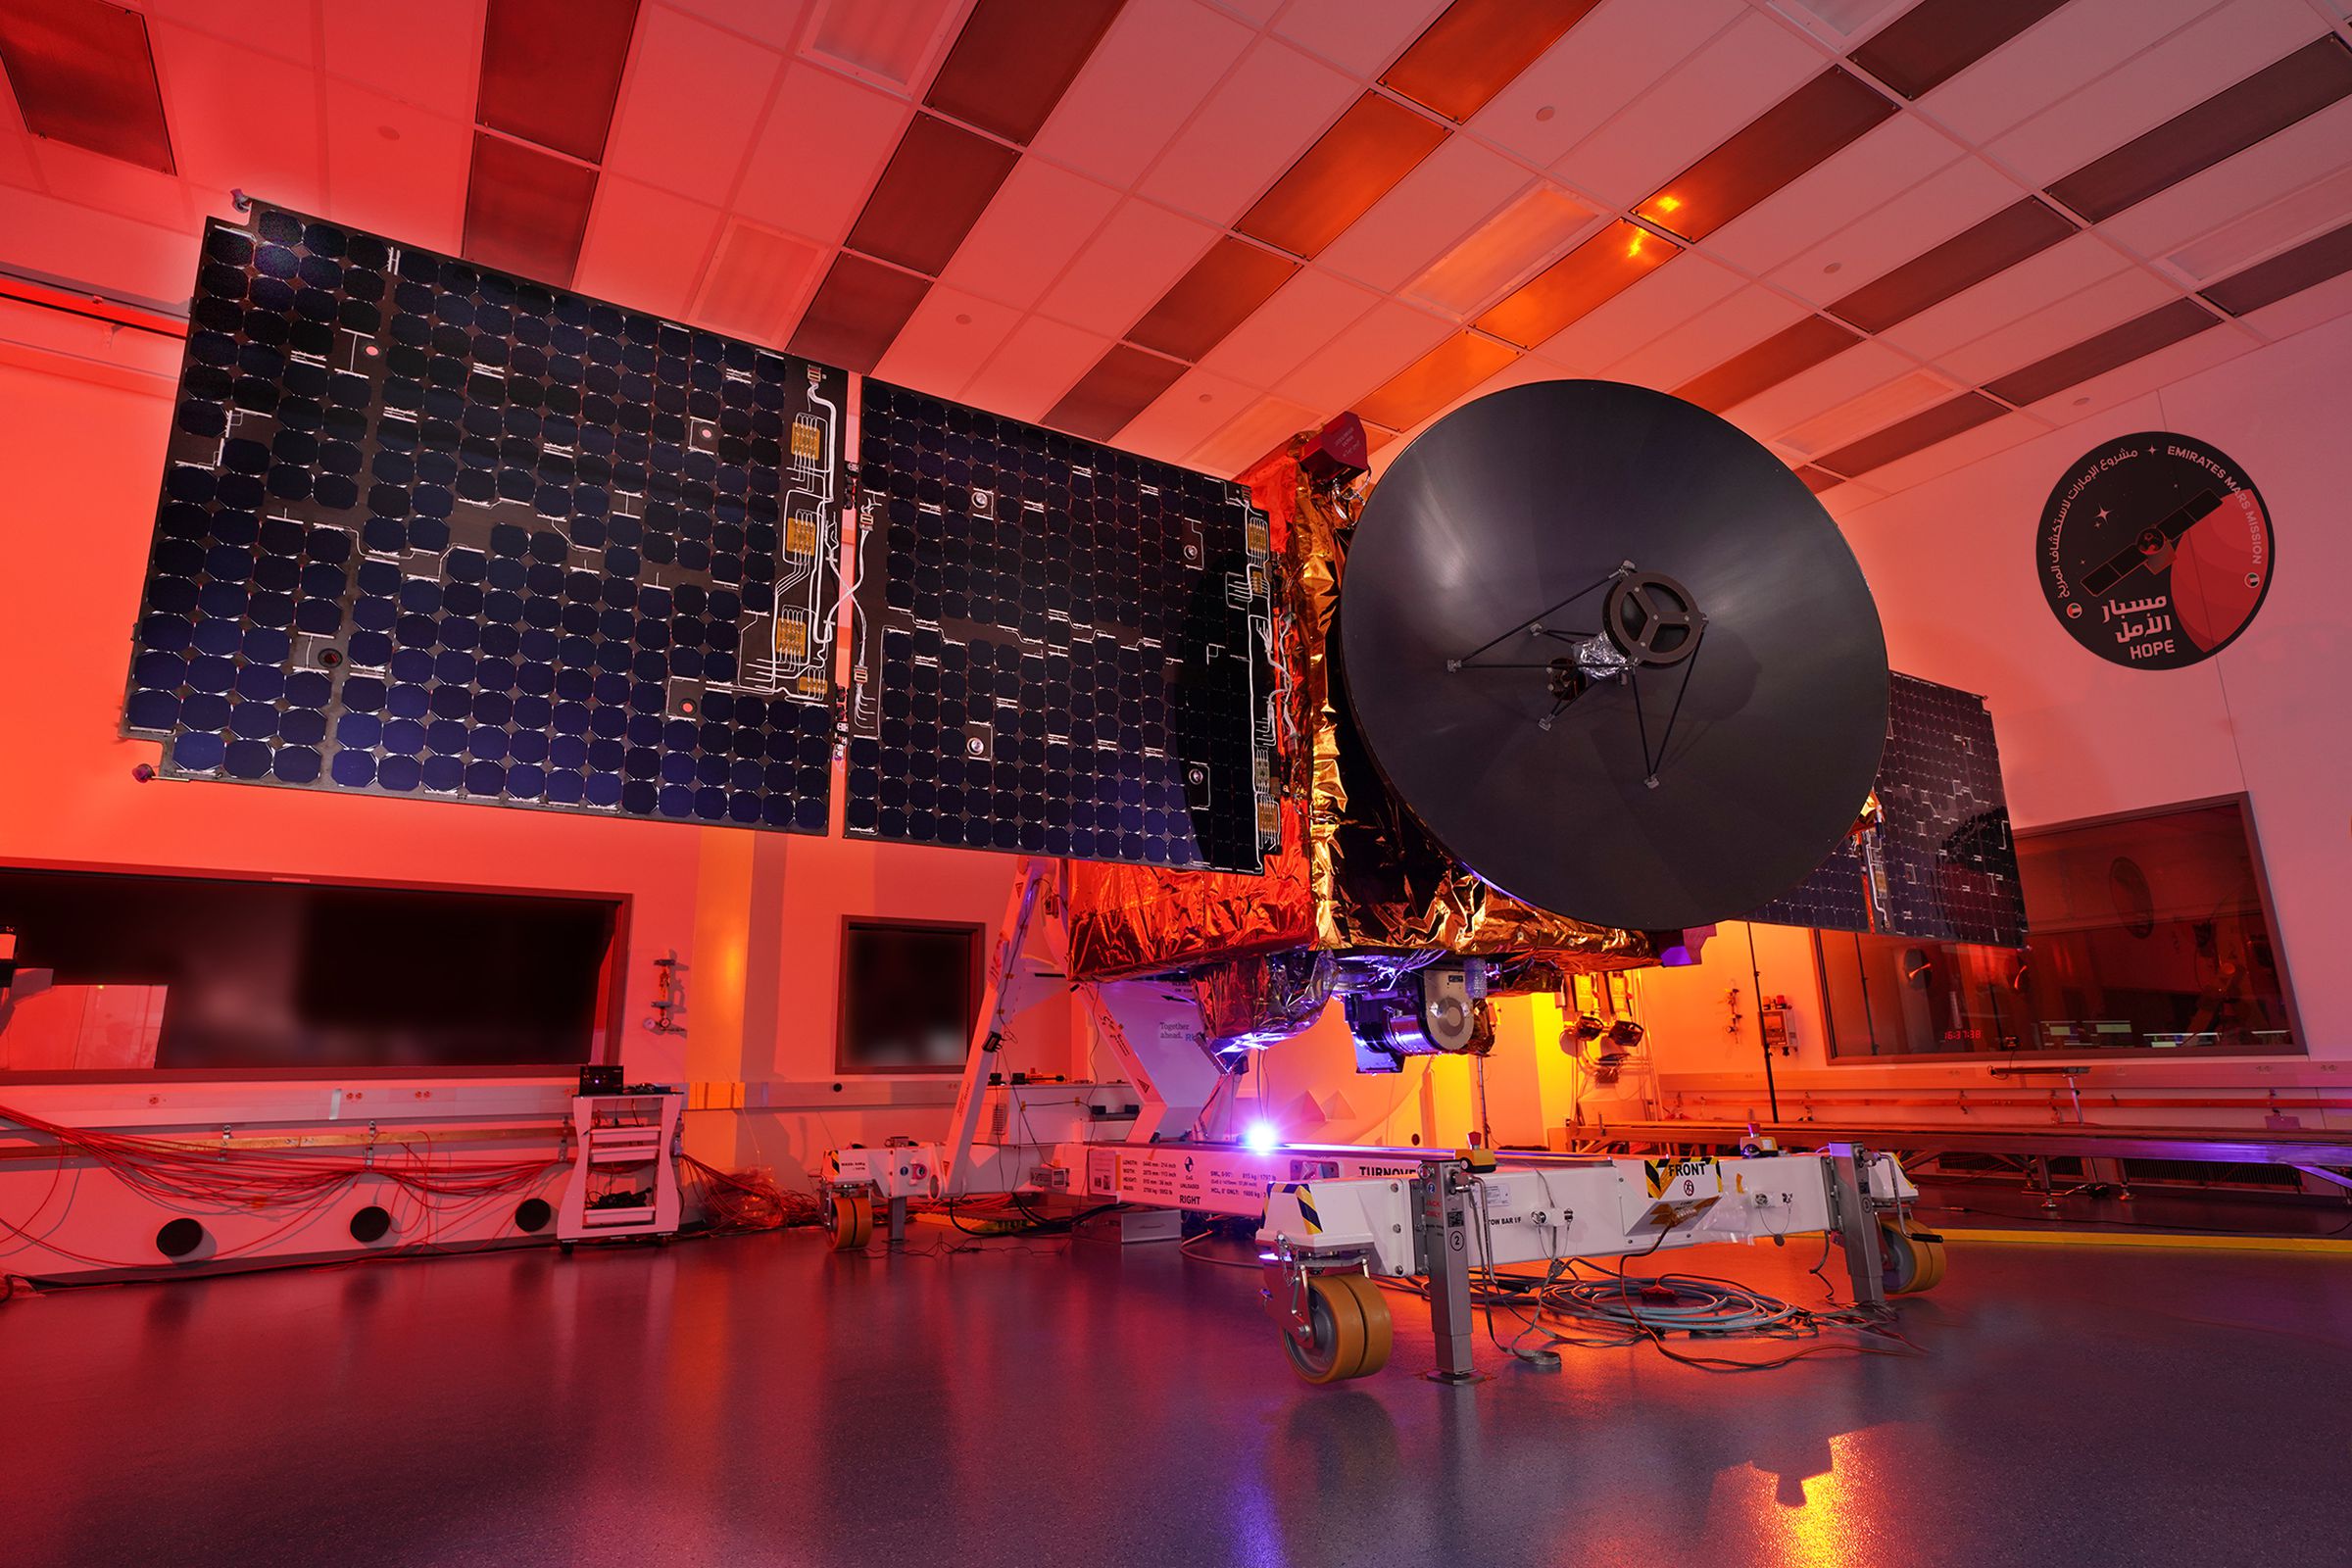 UAE’s Hope probe sits in a clean room before launch.